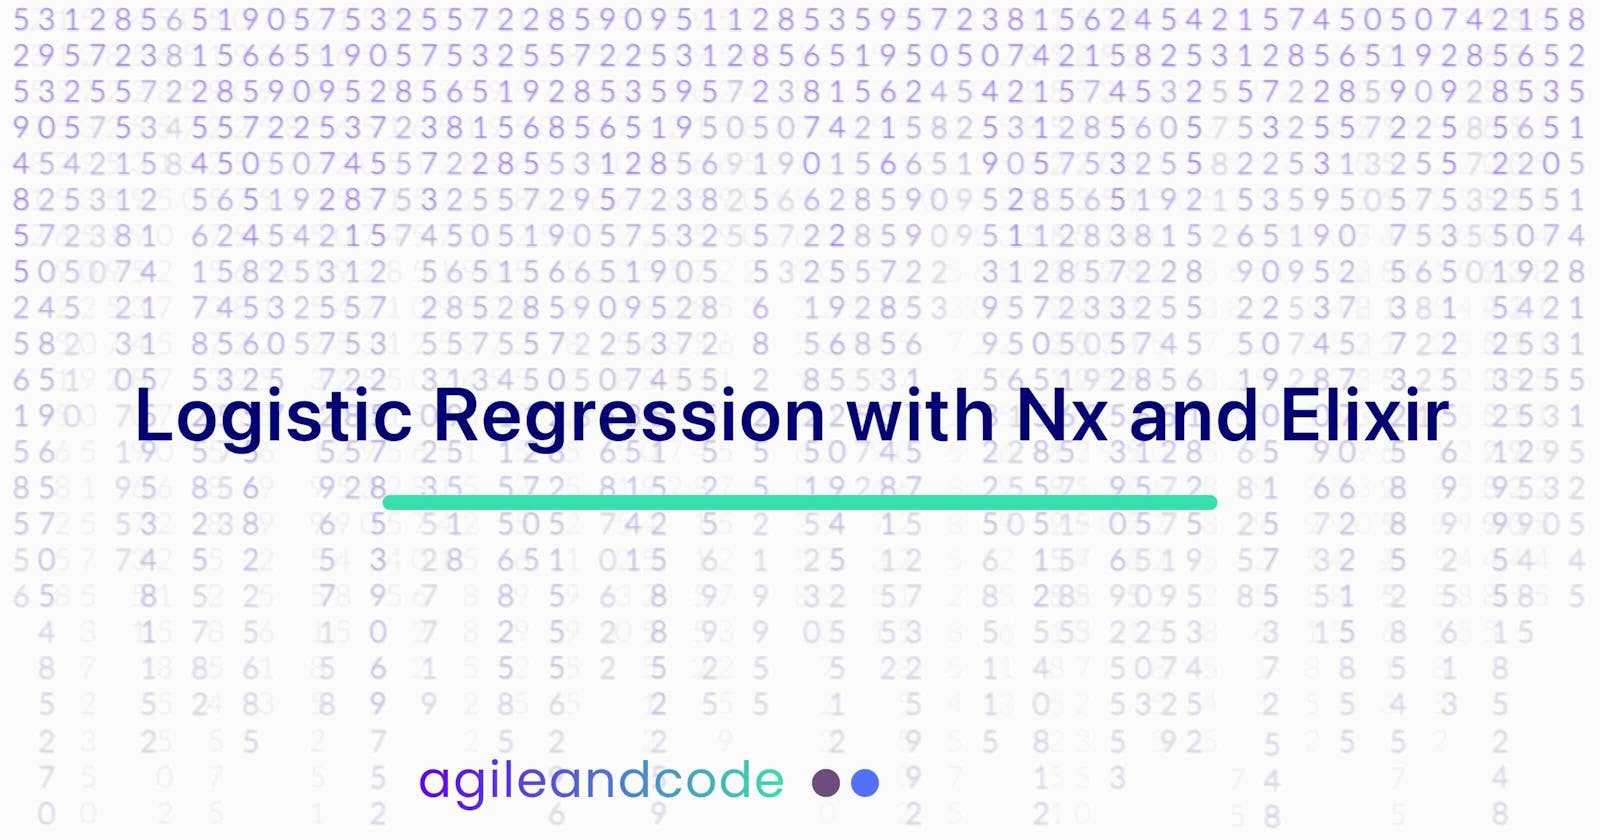 Logistic Regression with Nx and Elixir